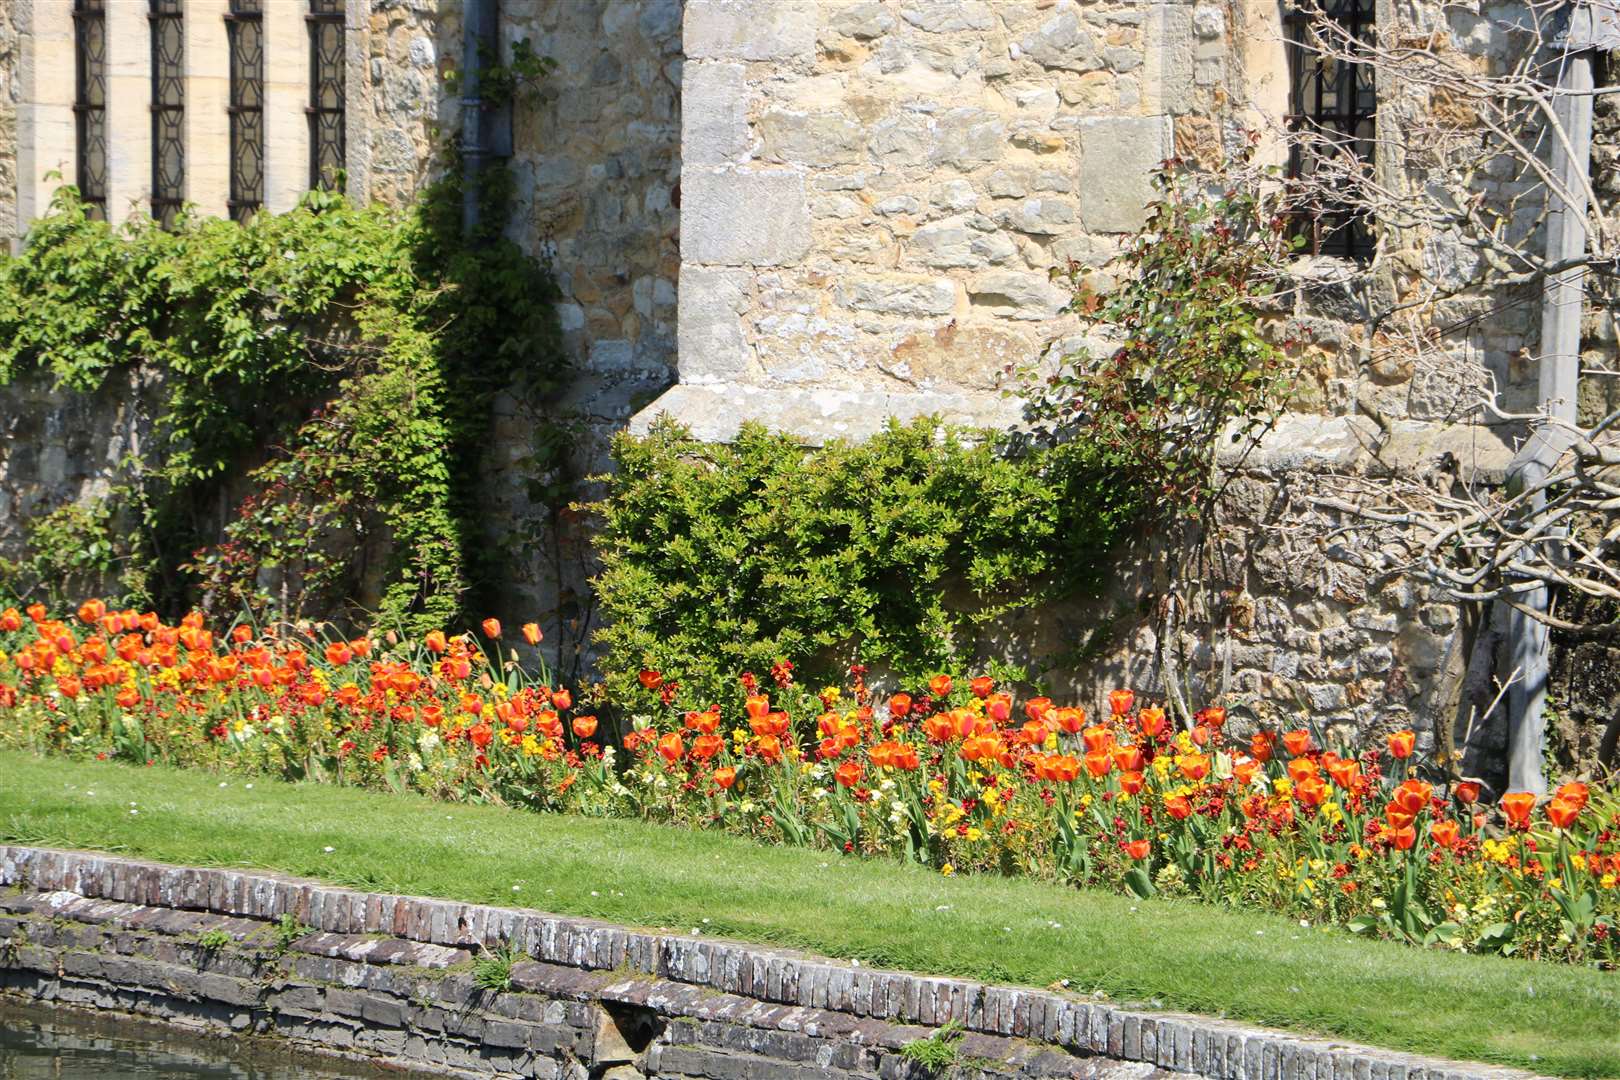 This year the tulip display is based around numbers and maths symbols. Picture: Hever Castle and Gardens